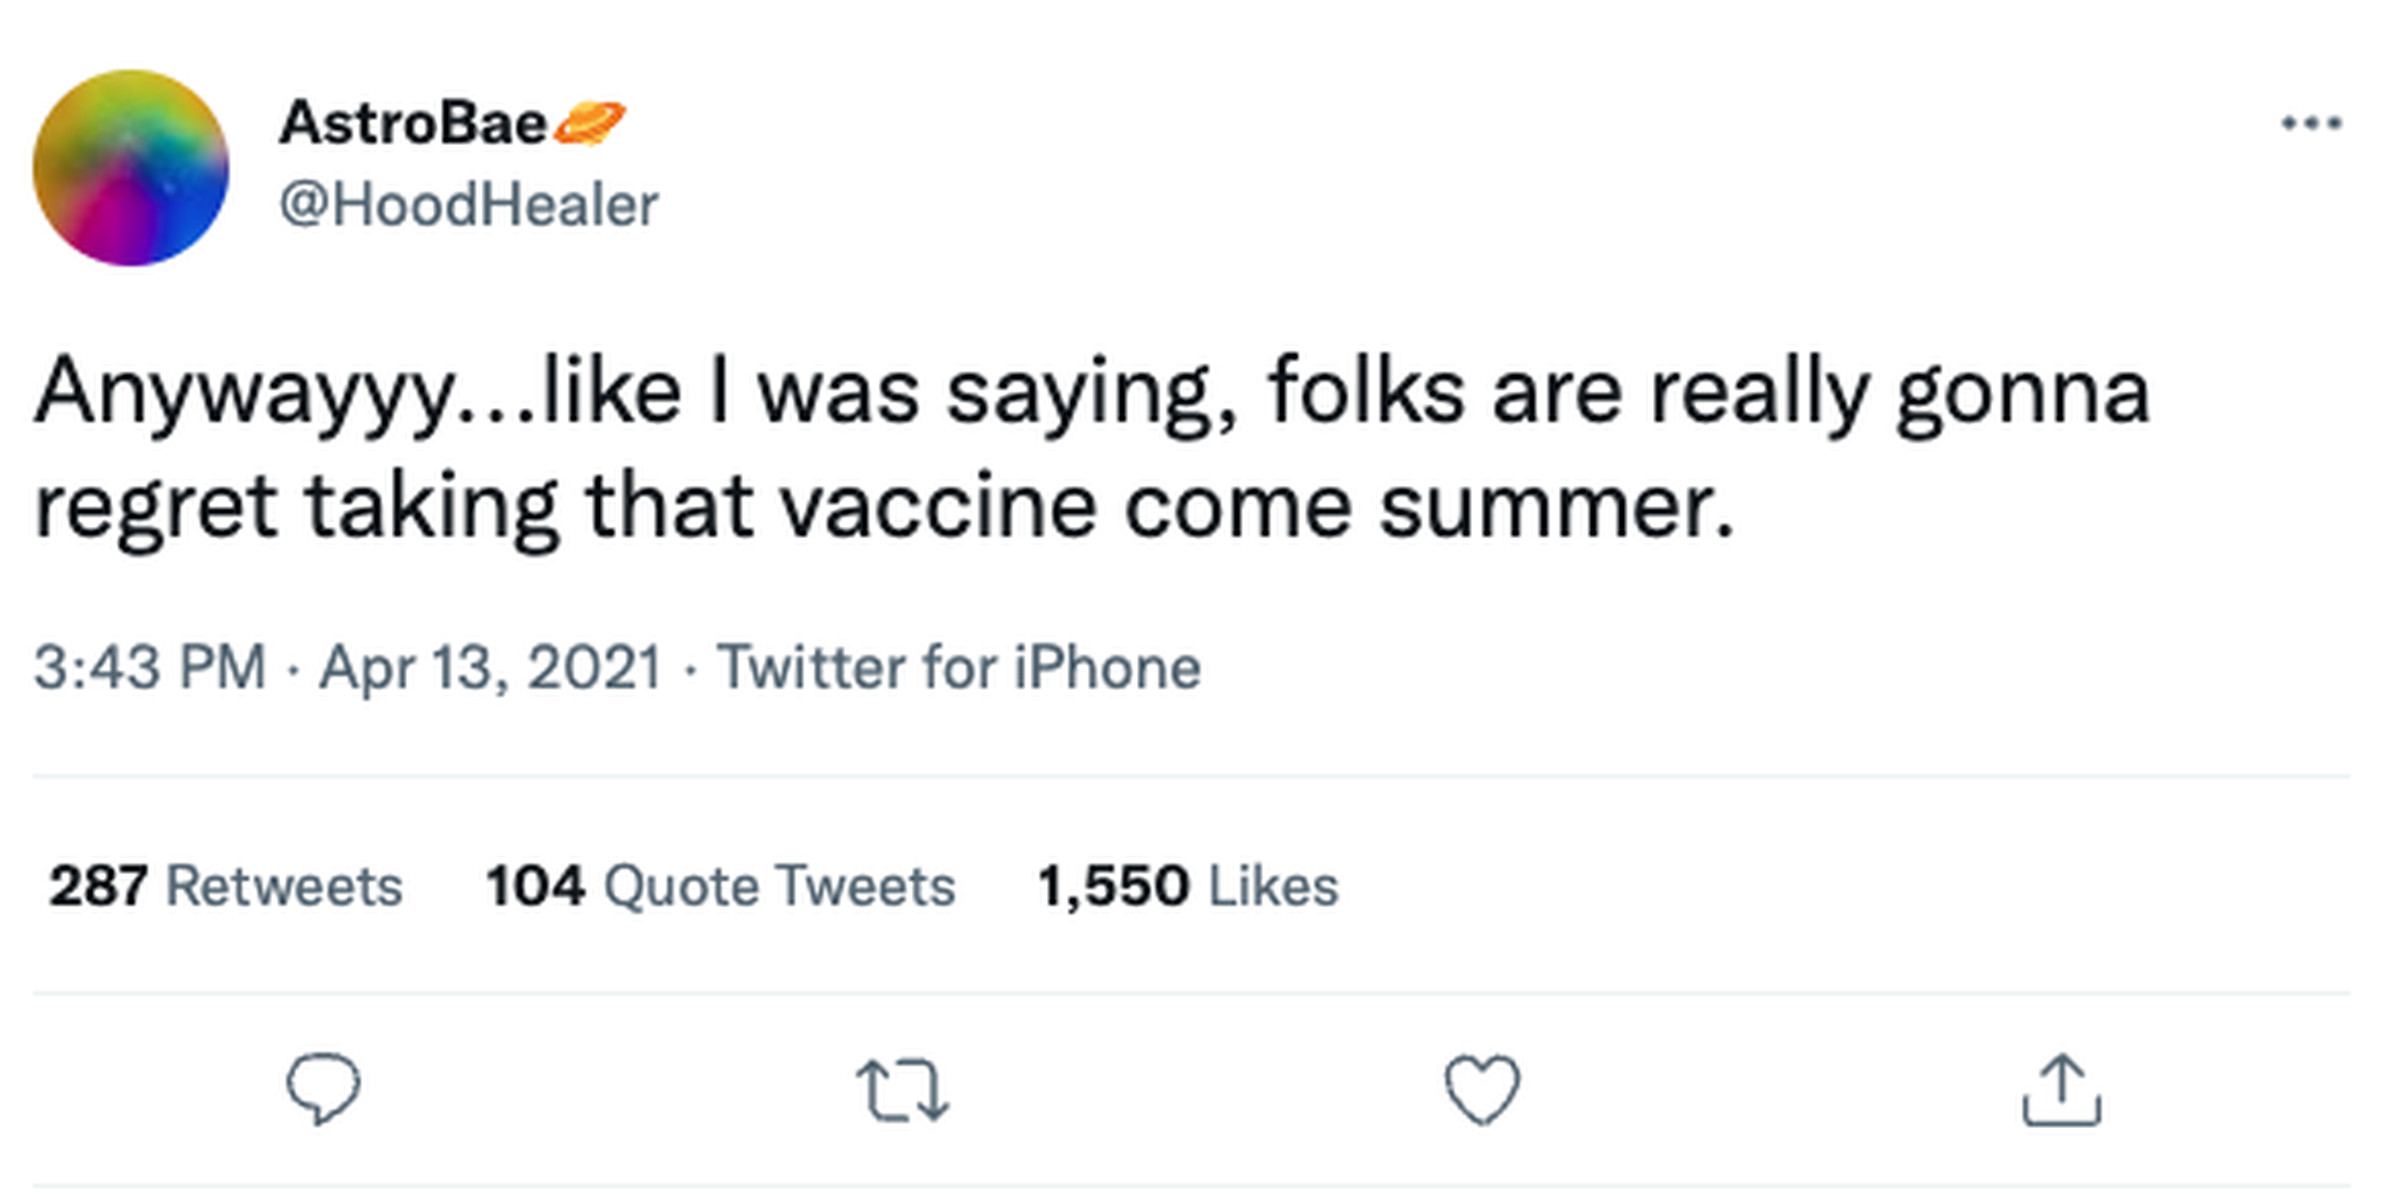 Screenshot of a tweet from @HoodHealer reading: “Anywayyy...like I was saying, folks are really gonna regret taking that vaccine come summer.”